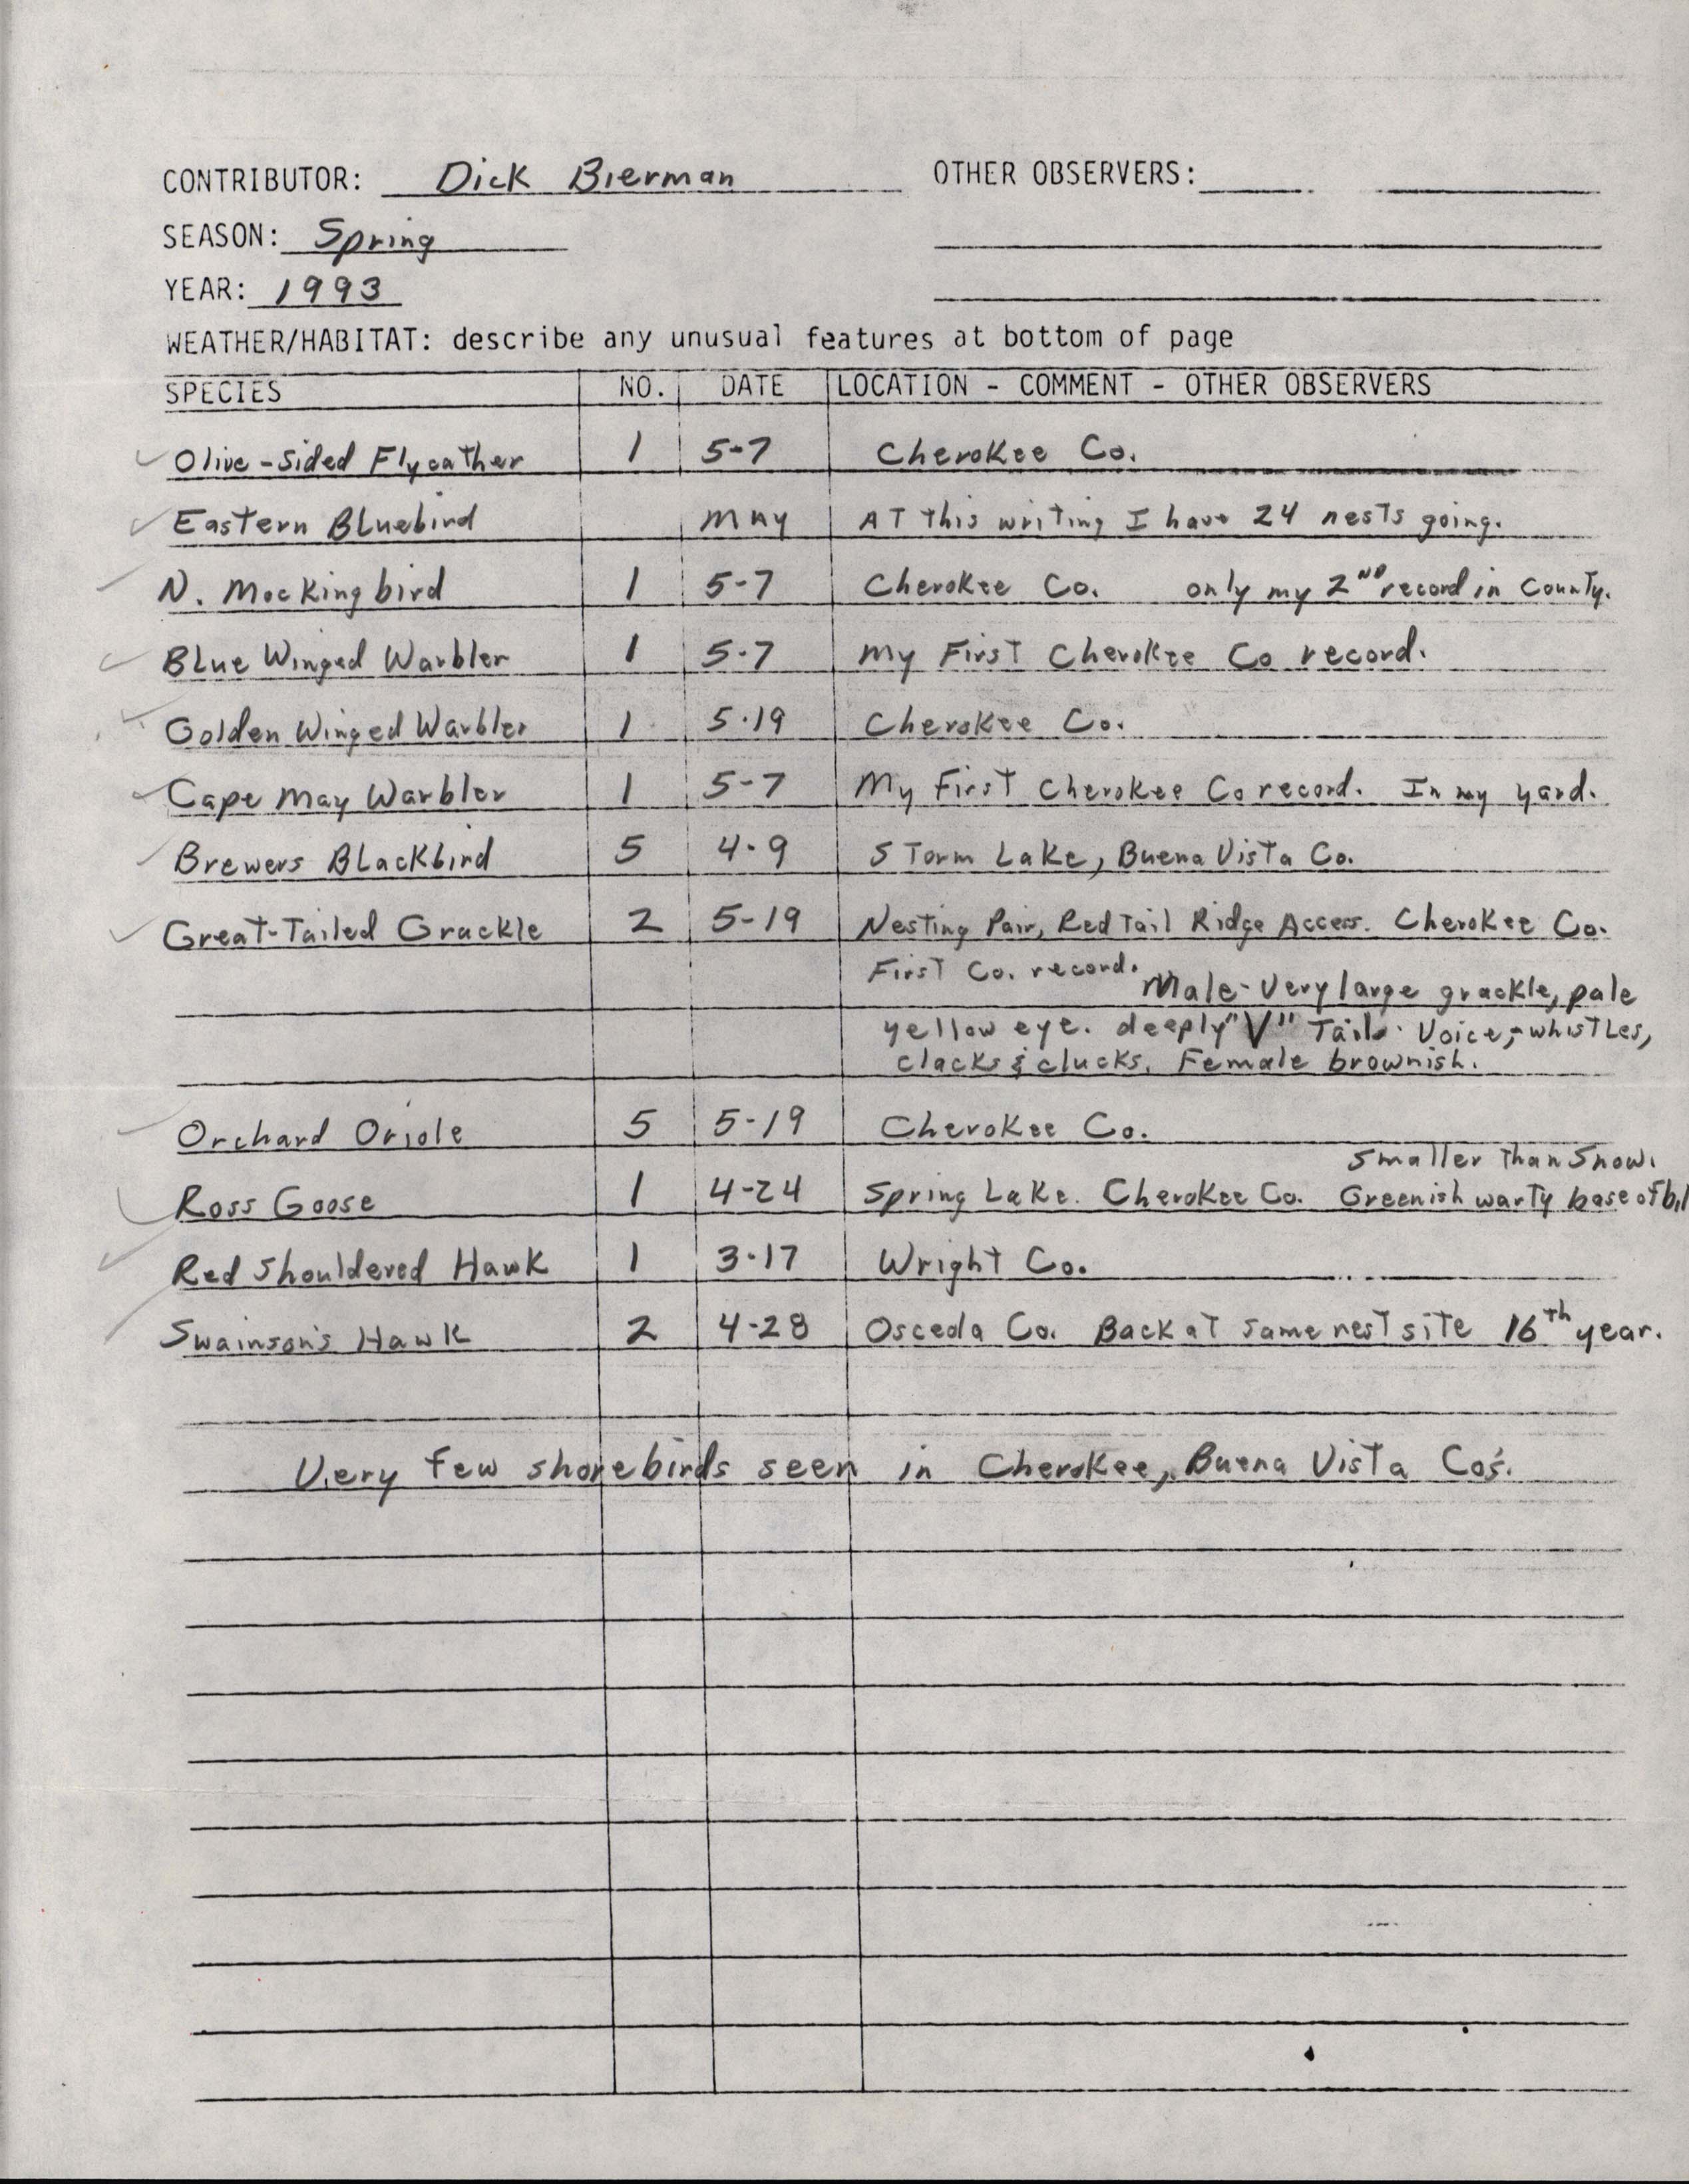 Annotated bird sighting list for Spring 1993 compiled by Dick Bierman